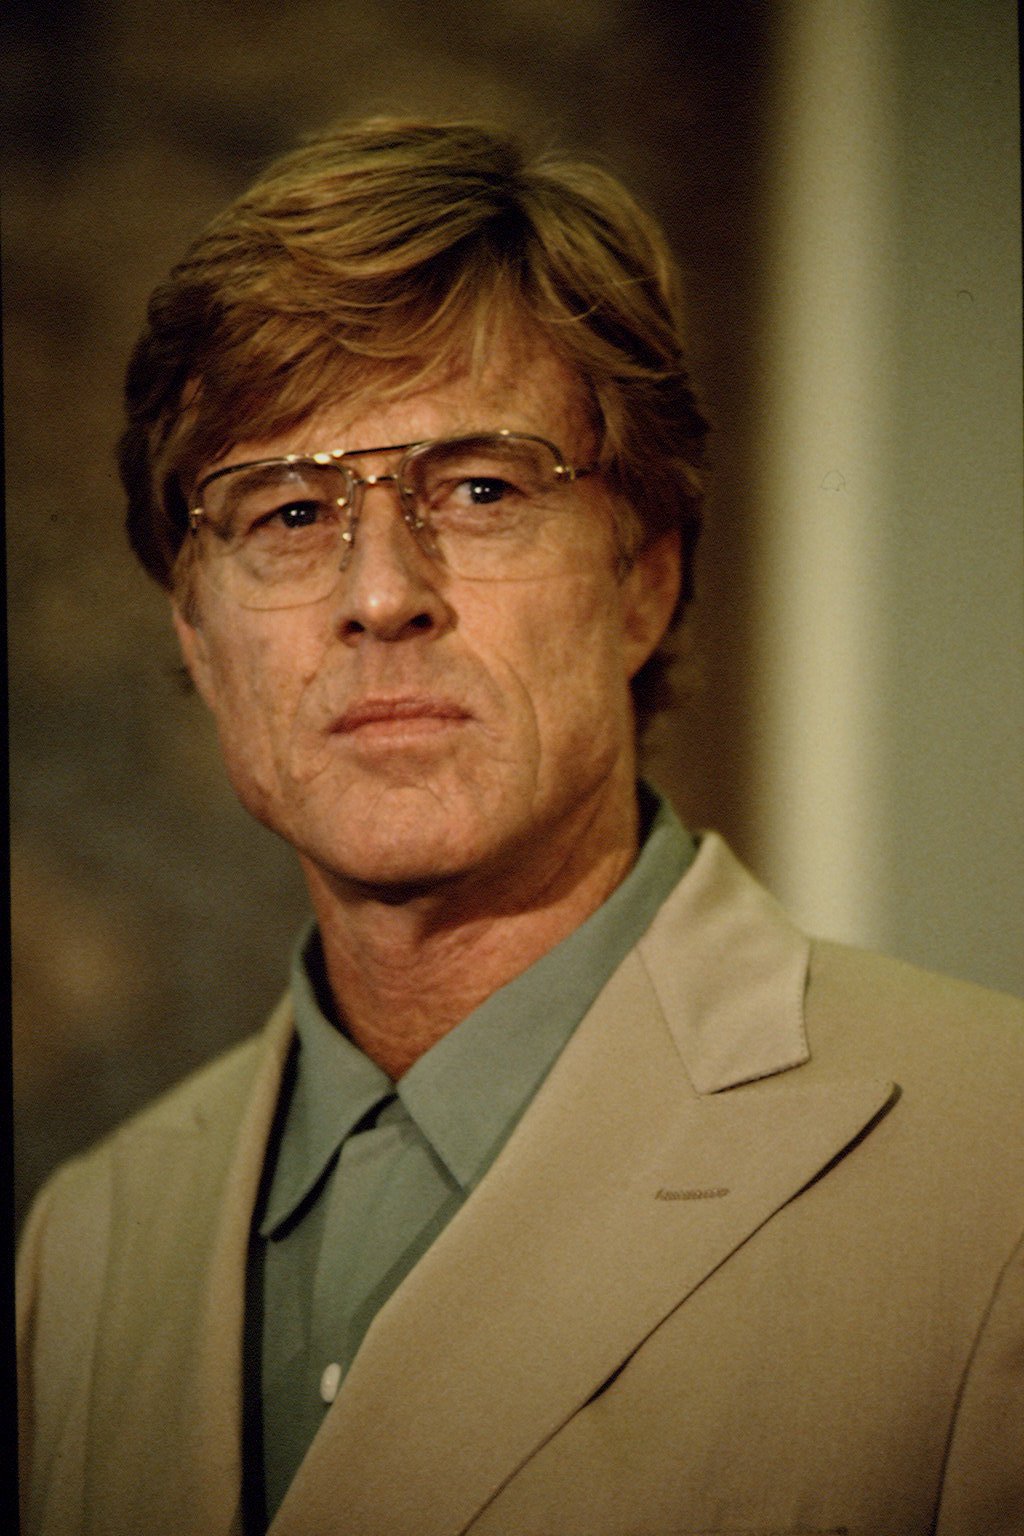 Photo of Robert Redford at a press conference in 1992 | Source: Getty Images